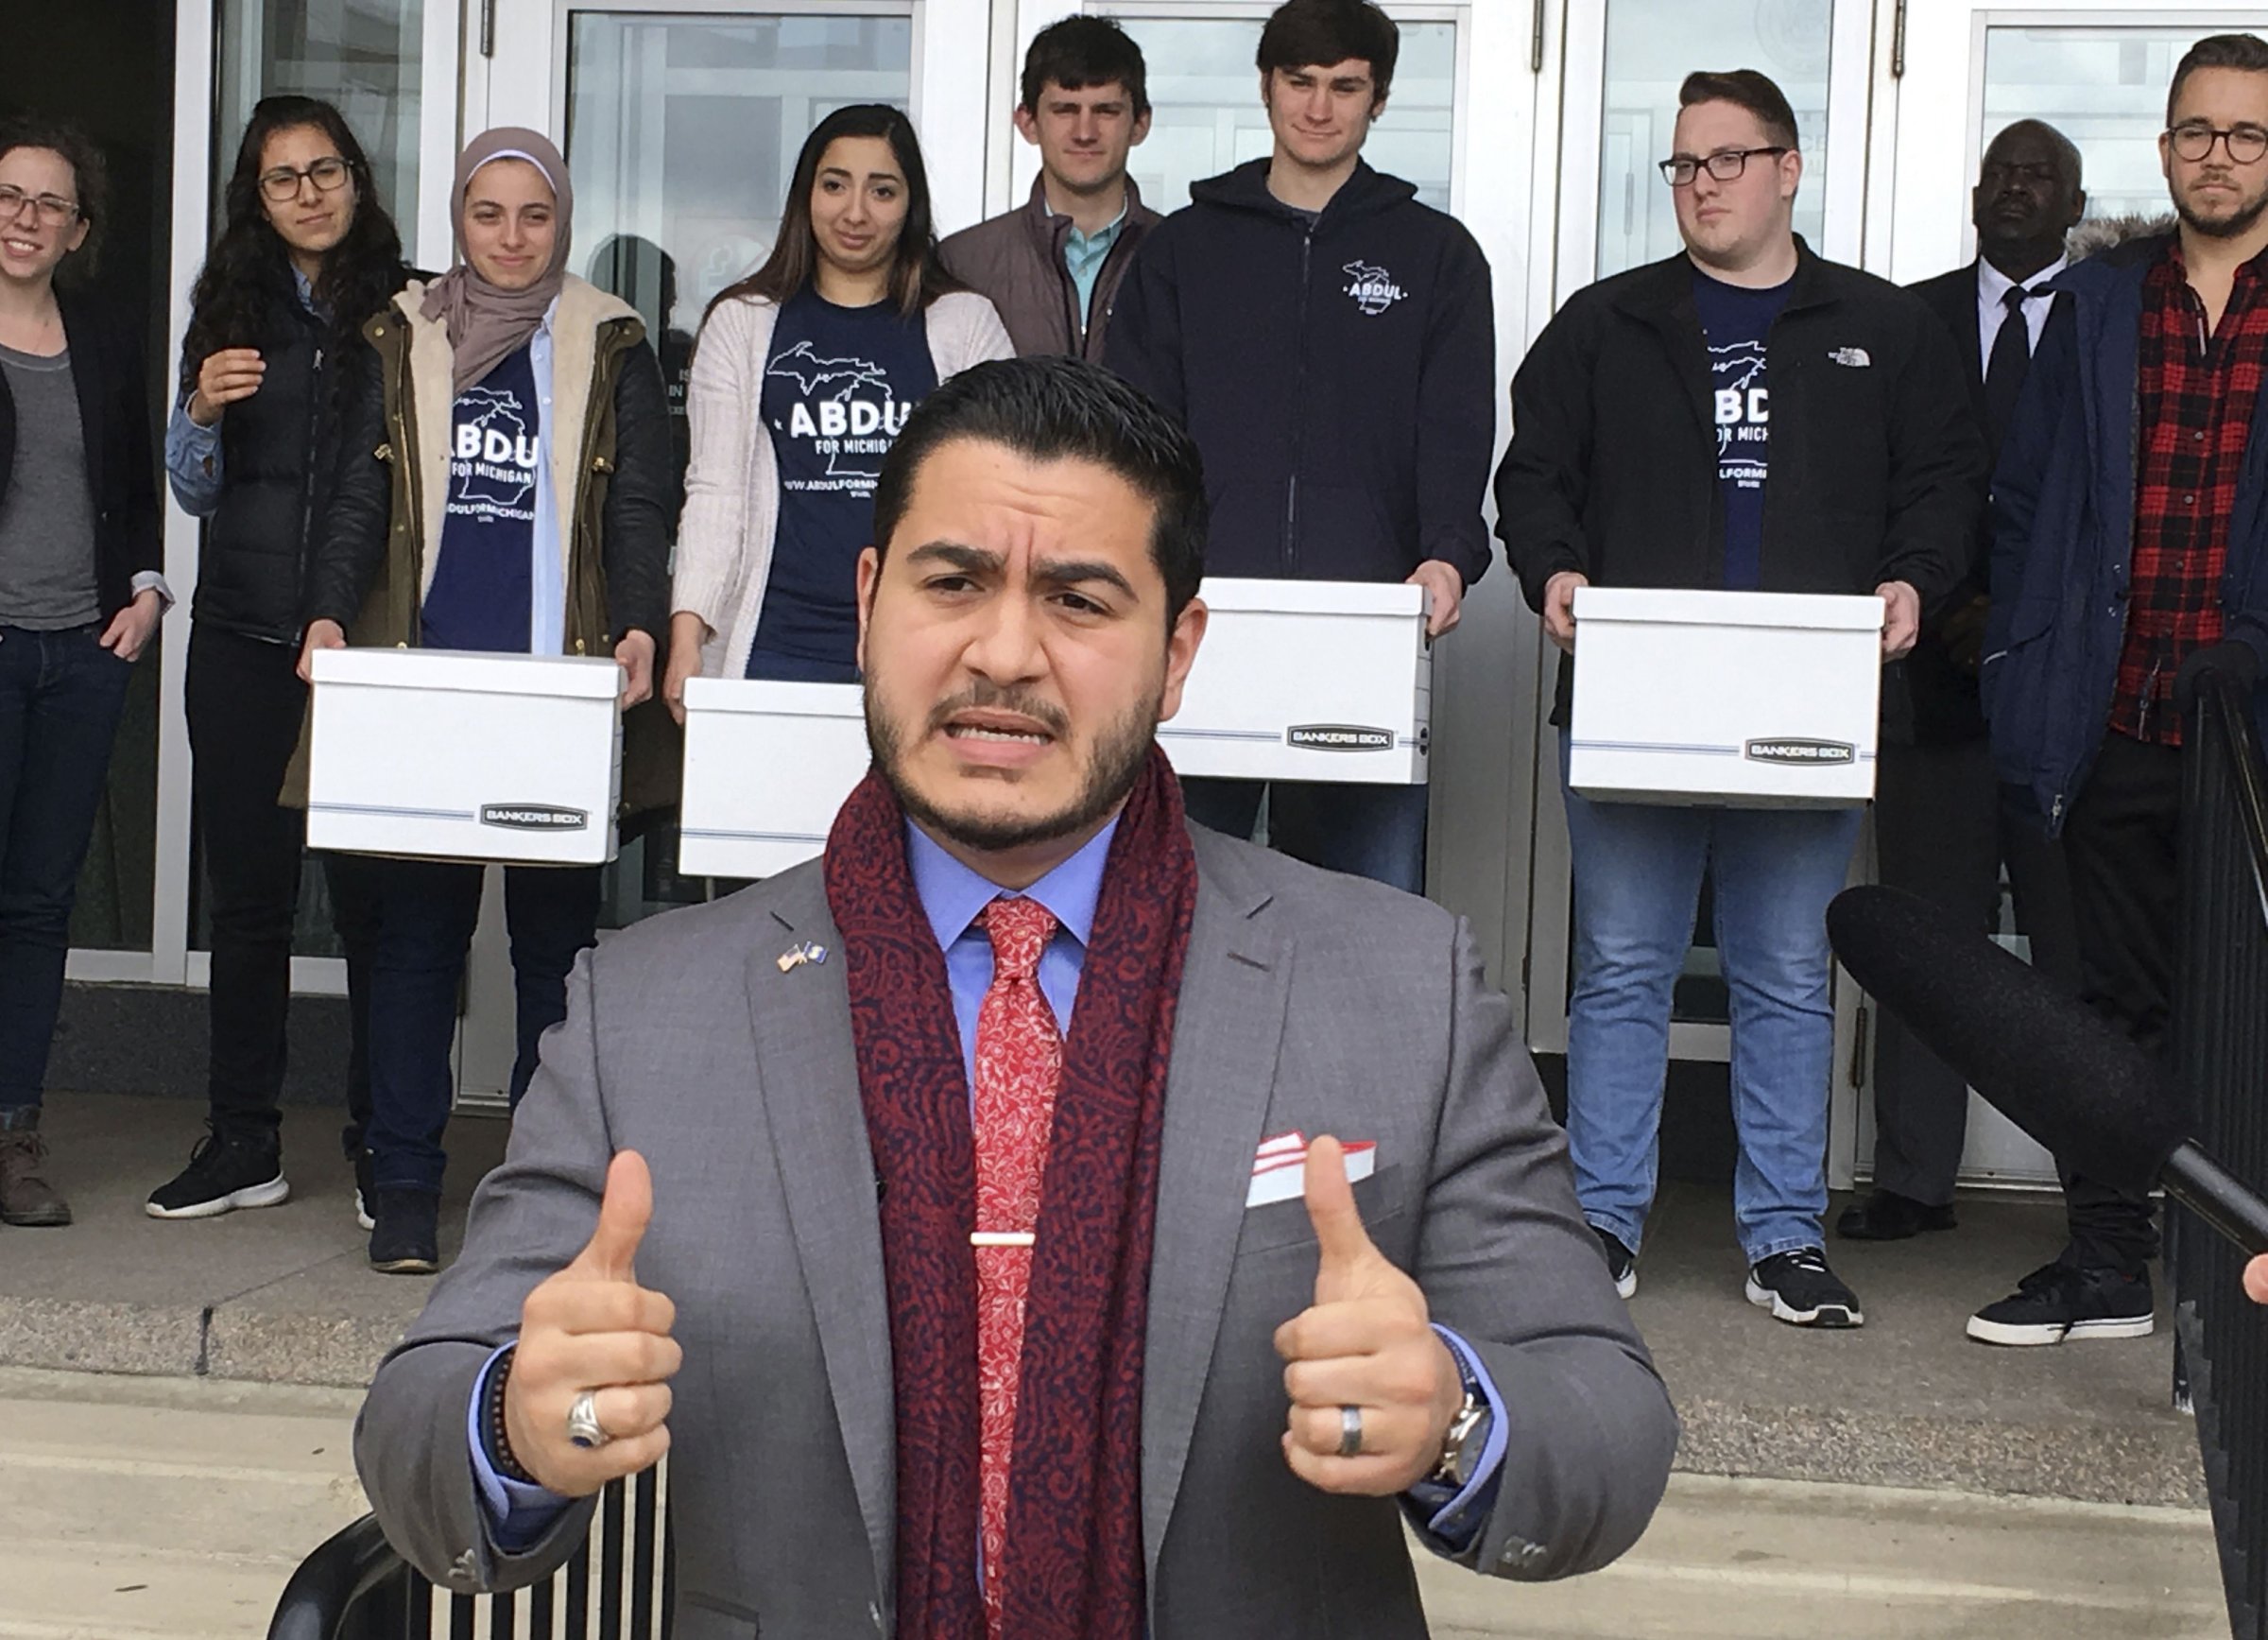 Democratic gubernatorial candidate Abdul El-Sayed speaks before submitting 24,000 nominating petitions to the Michigan Bureau of Elections, in Lansing, Mich.